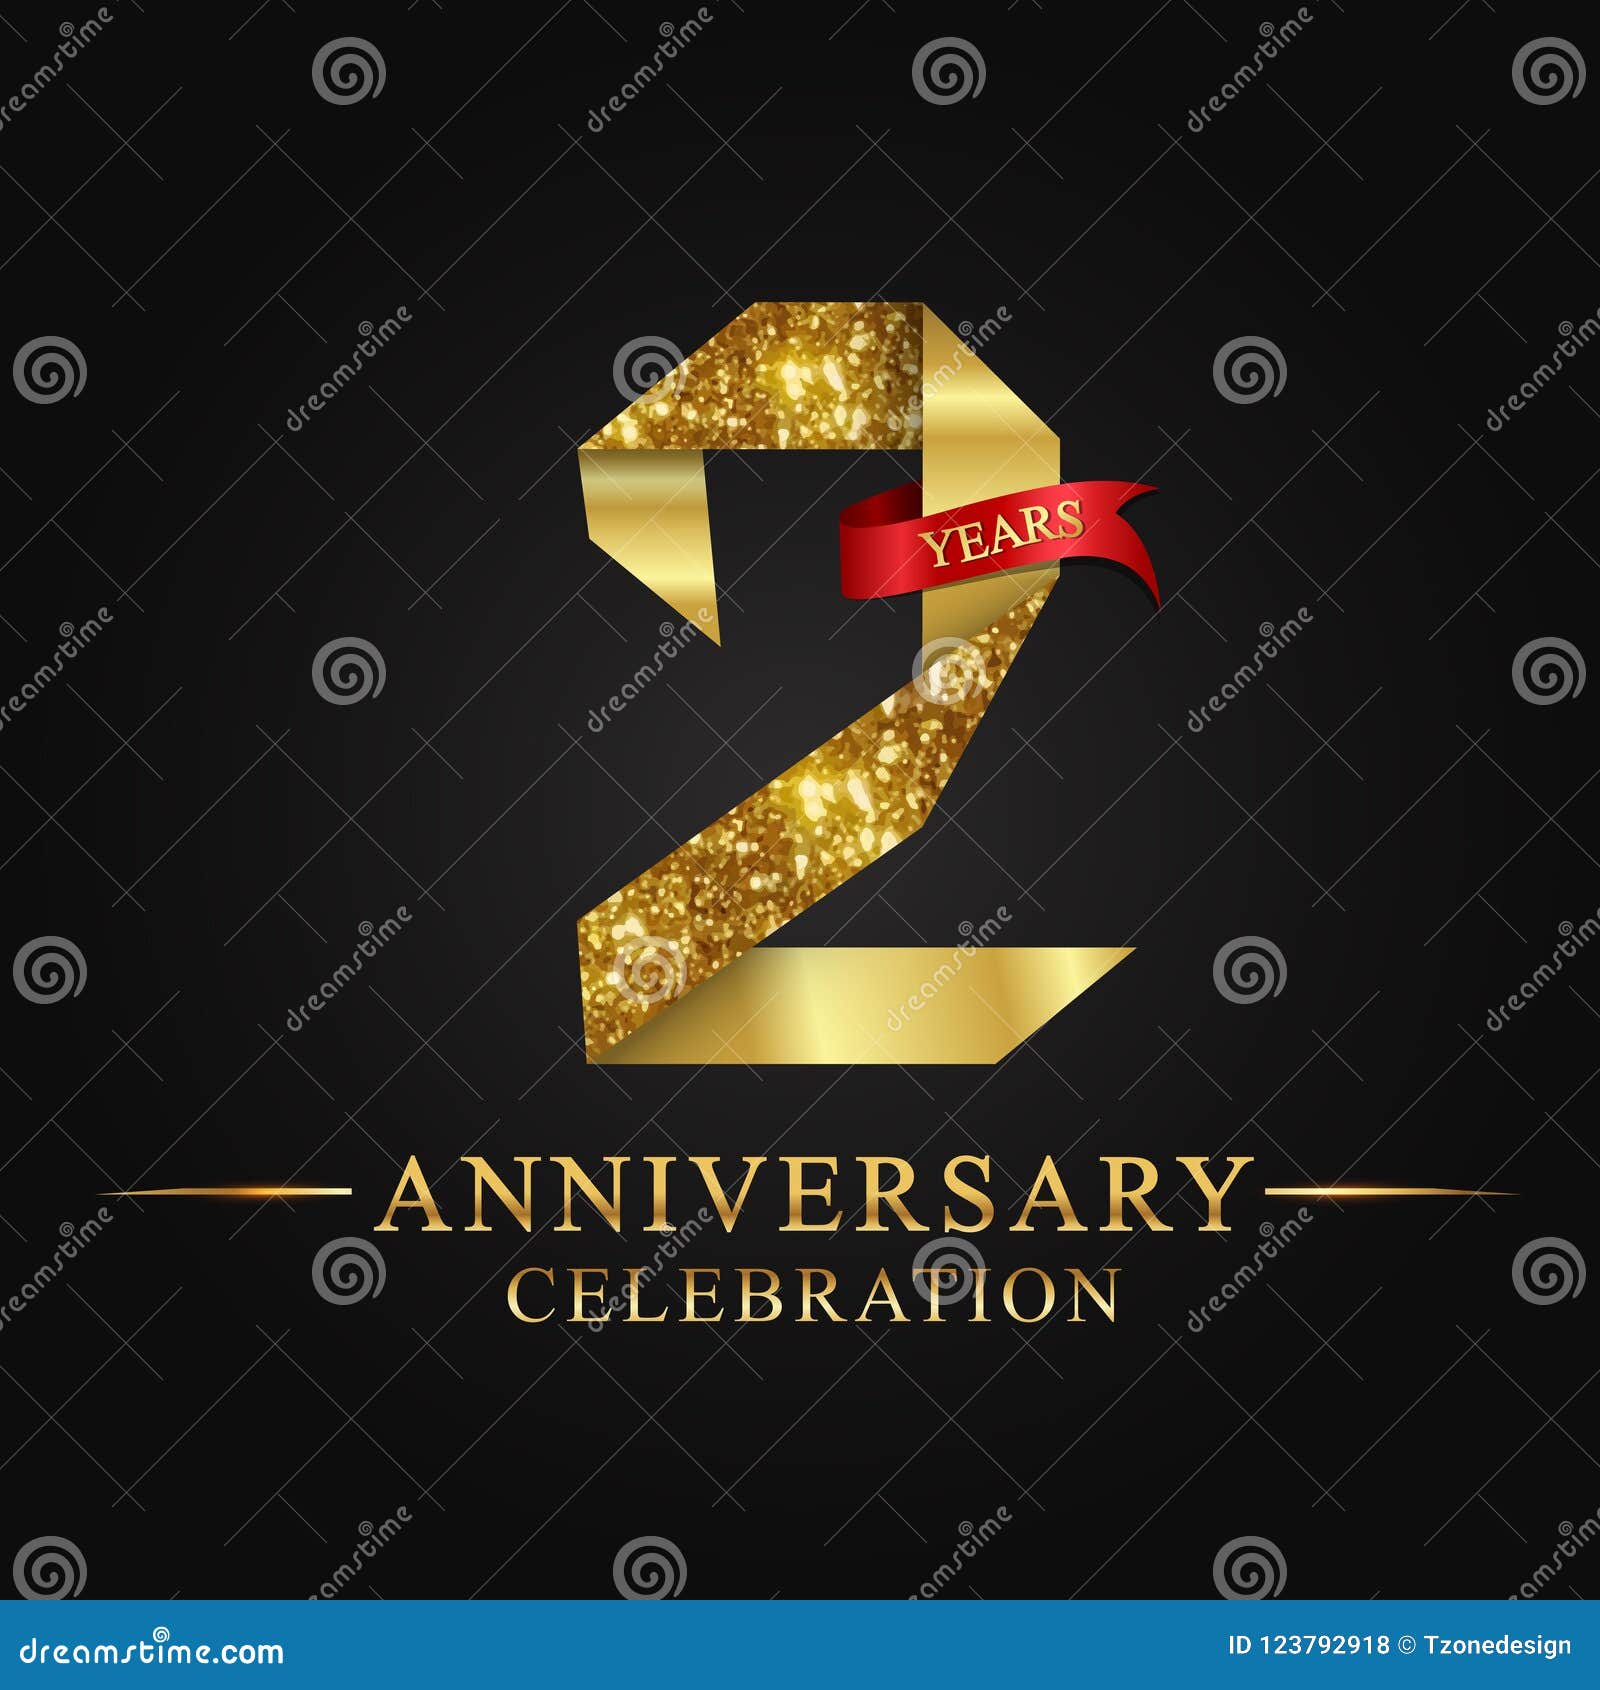 2nd anniversary years celebration logotype. logo ribbon gold number and red ribbon on black background.